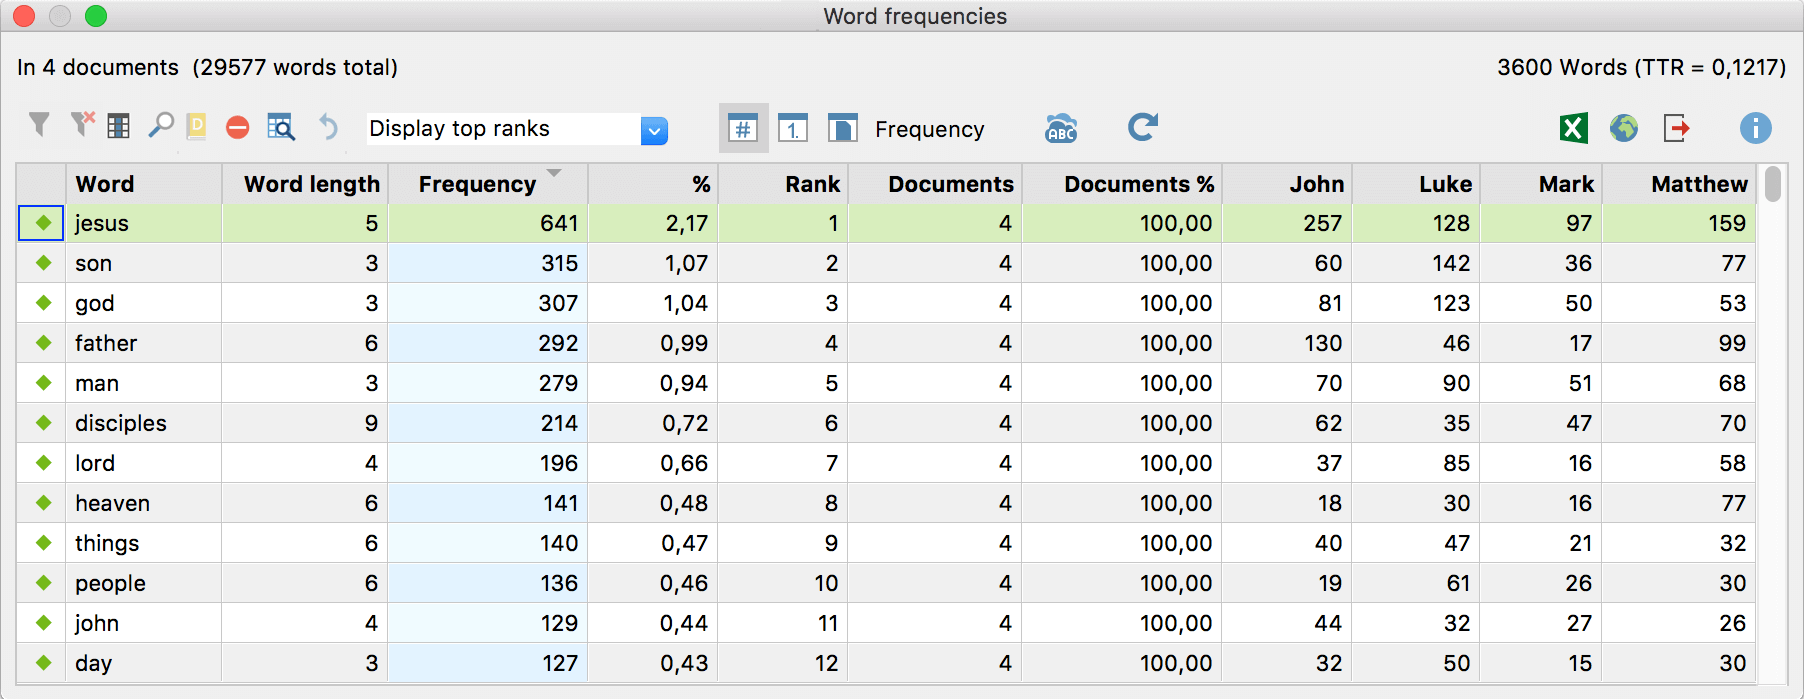 Word frequency table showing the word frequencies for each document